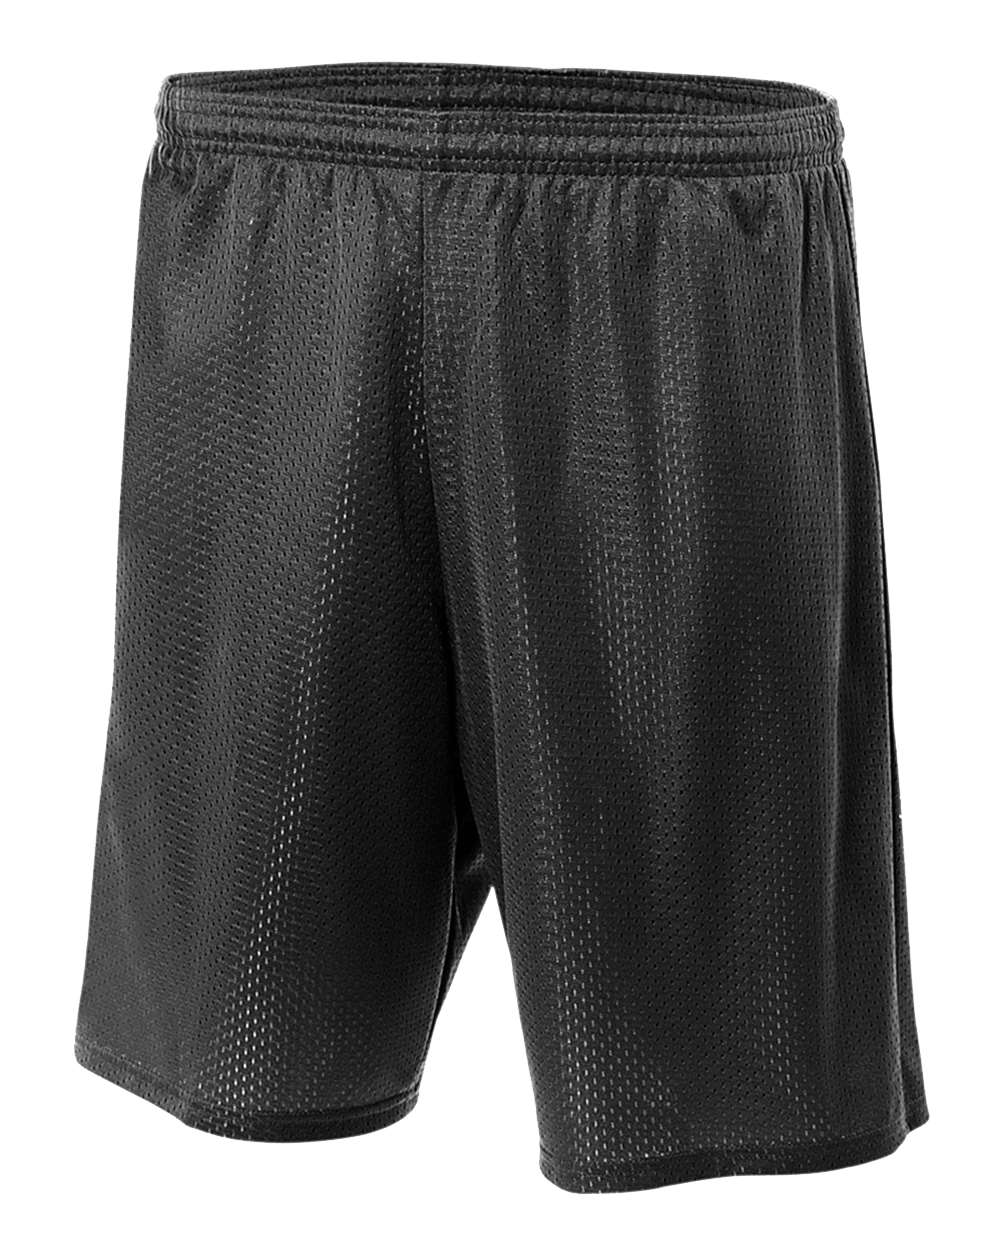 A4 Sprint 9" Lined Tricot Mesh Shorts